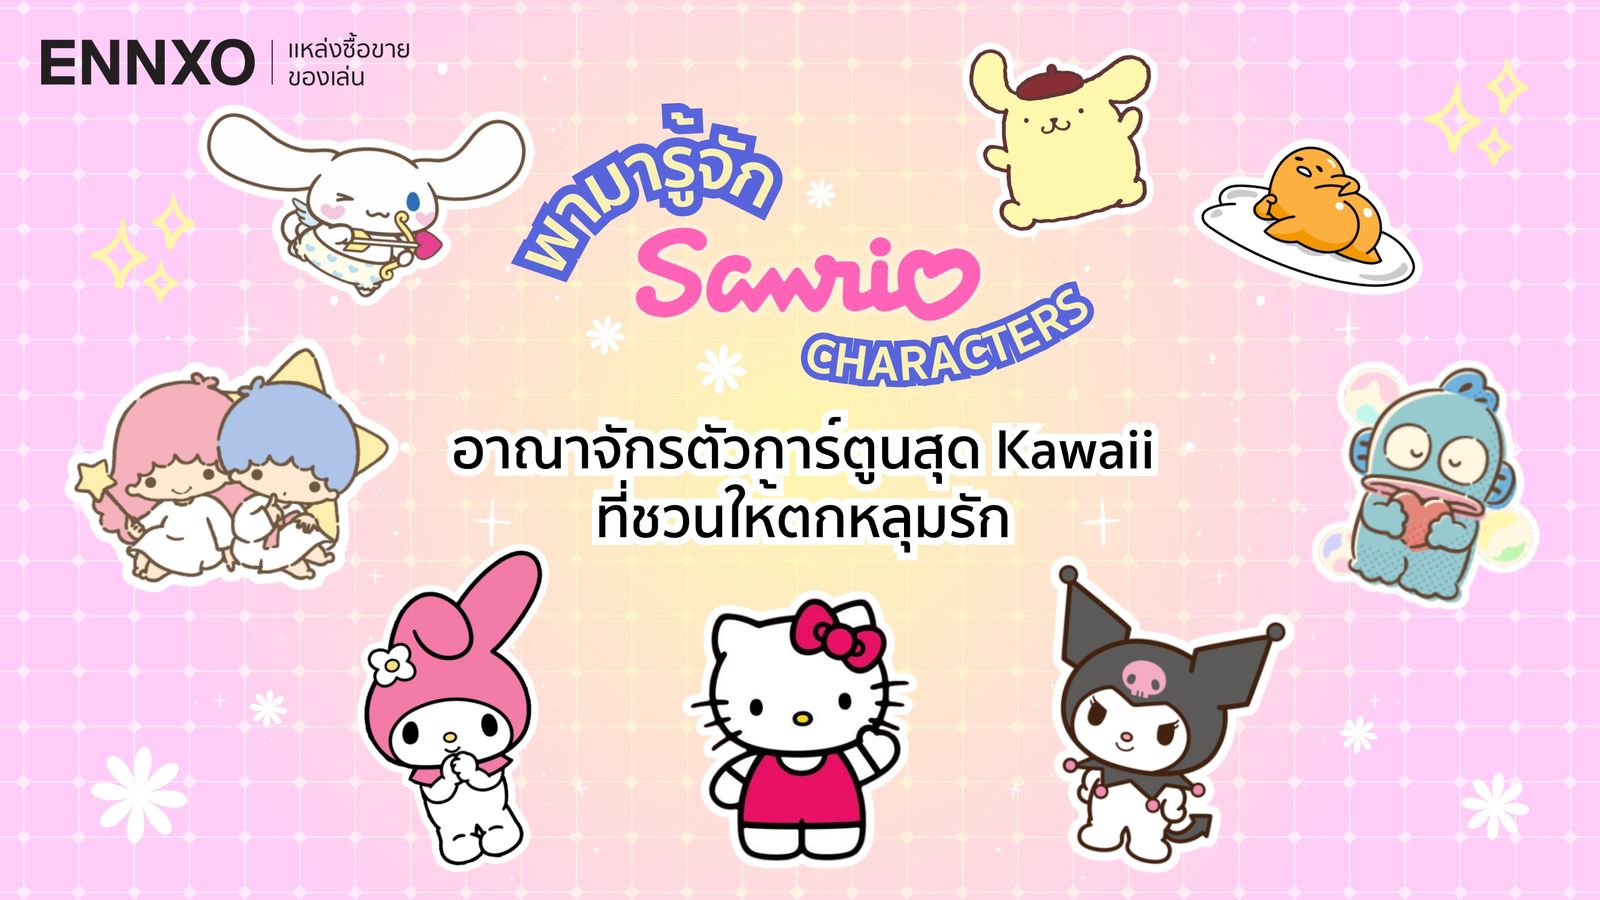 All Sanrio Character Goodies